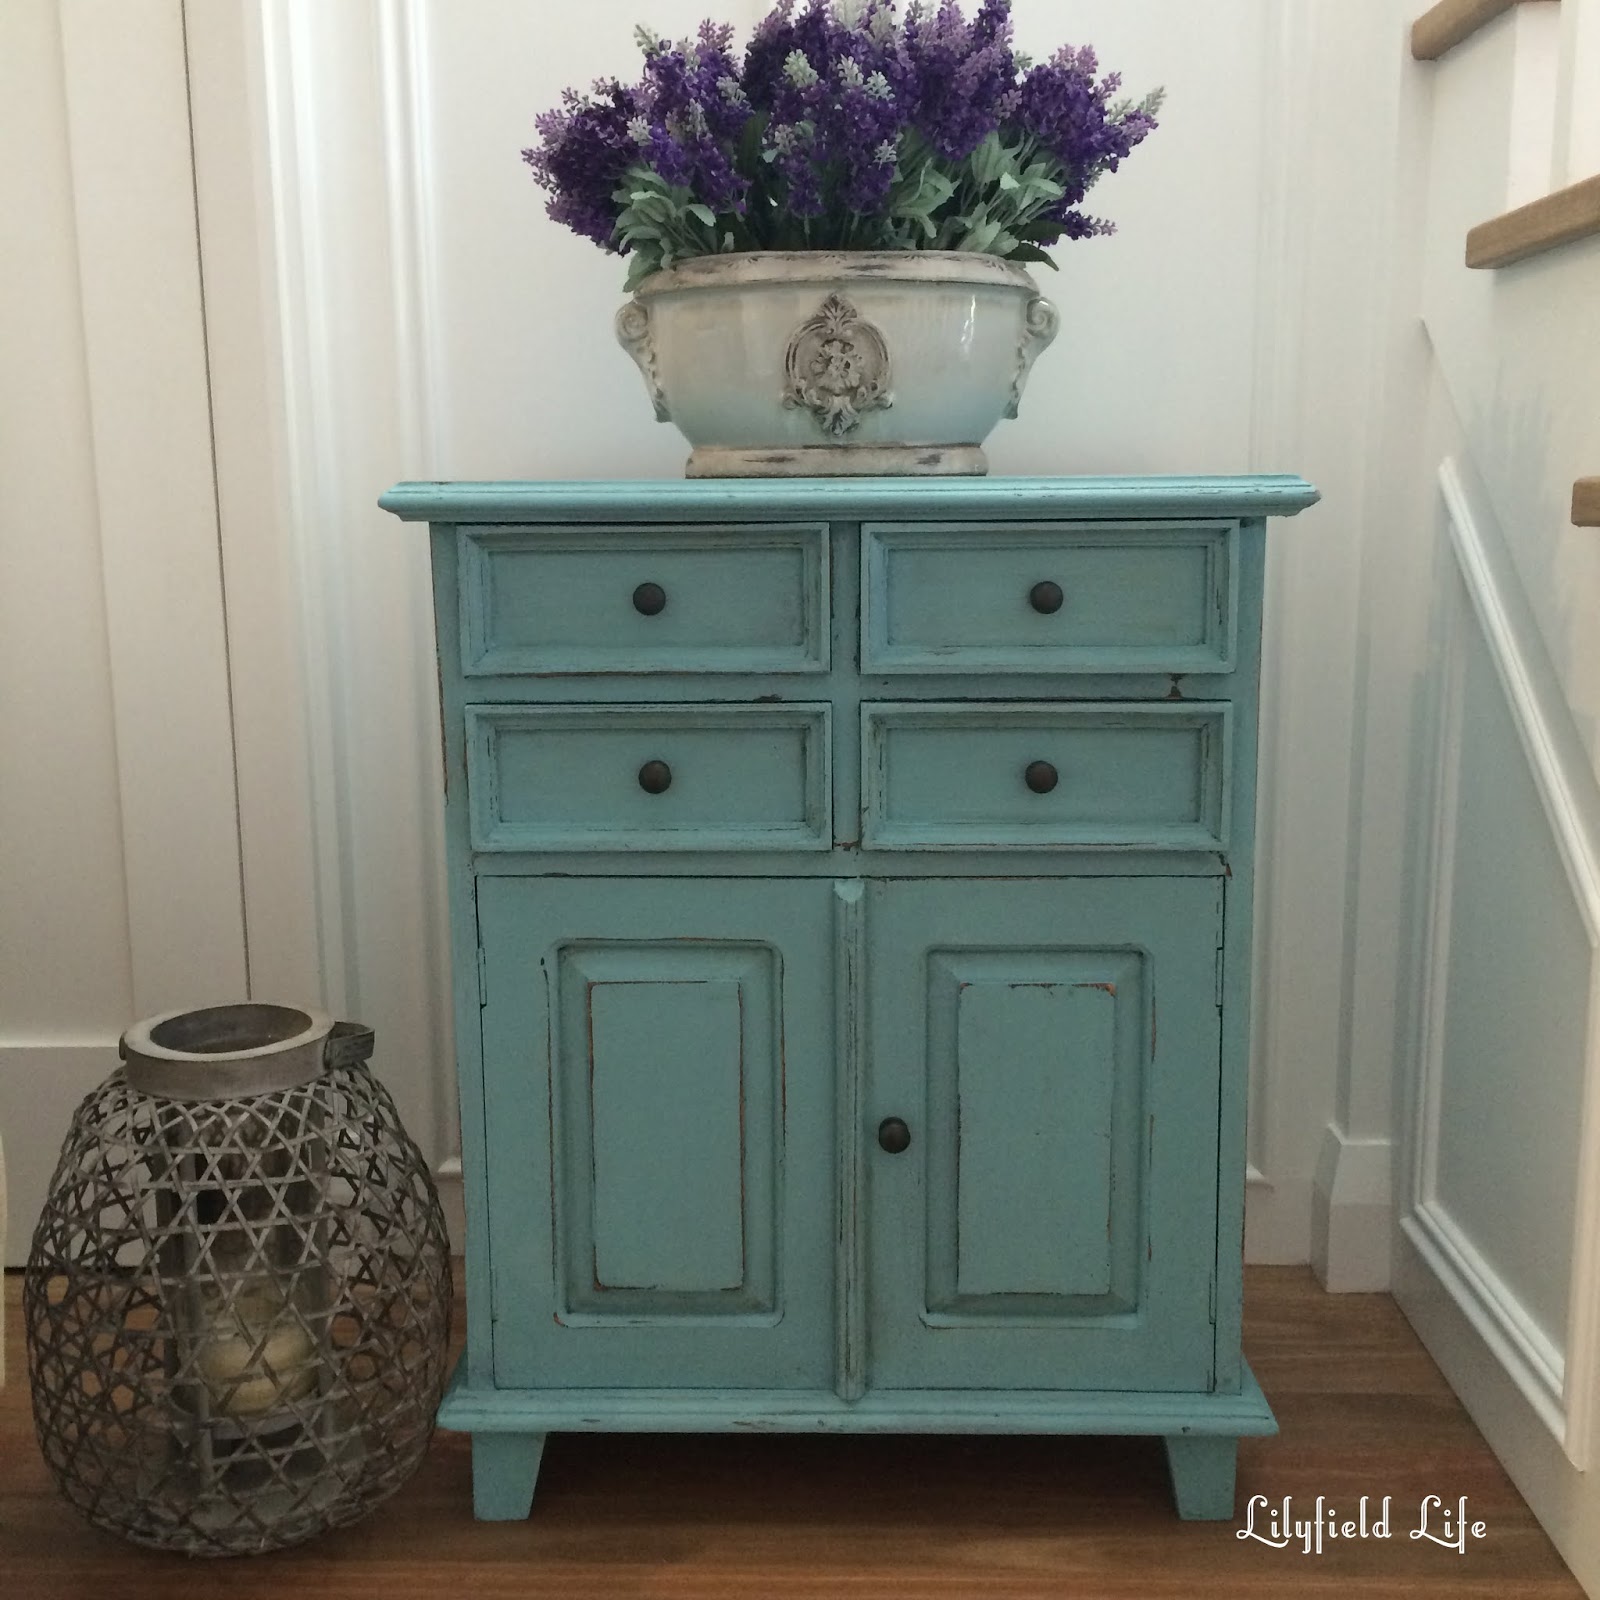 Lilyfield Life: Rustic Turquoise cabinet